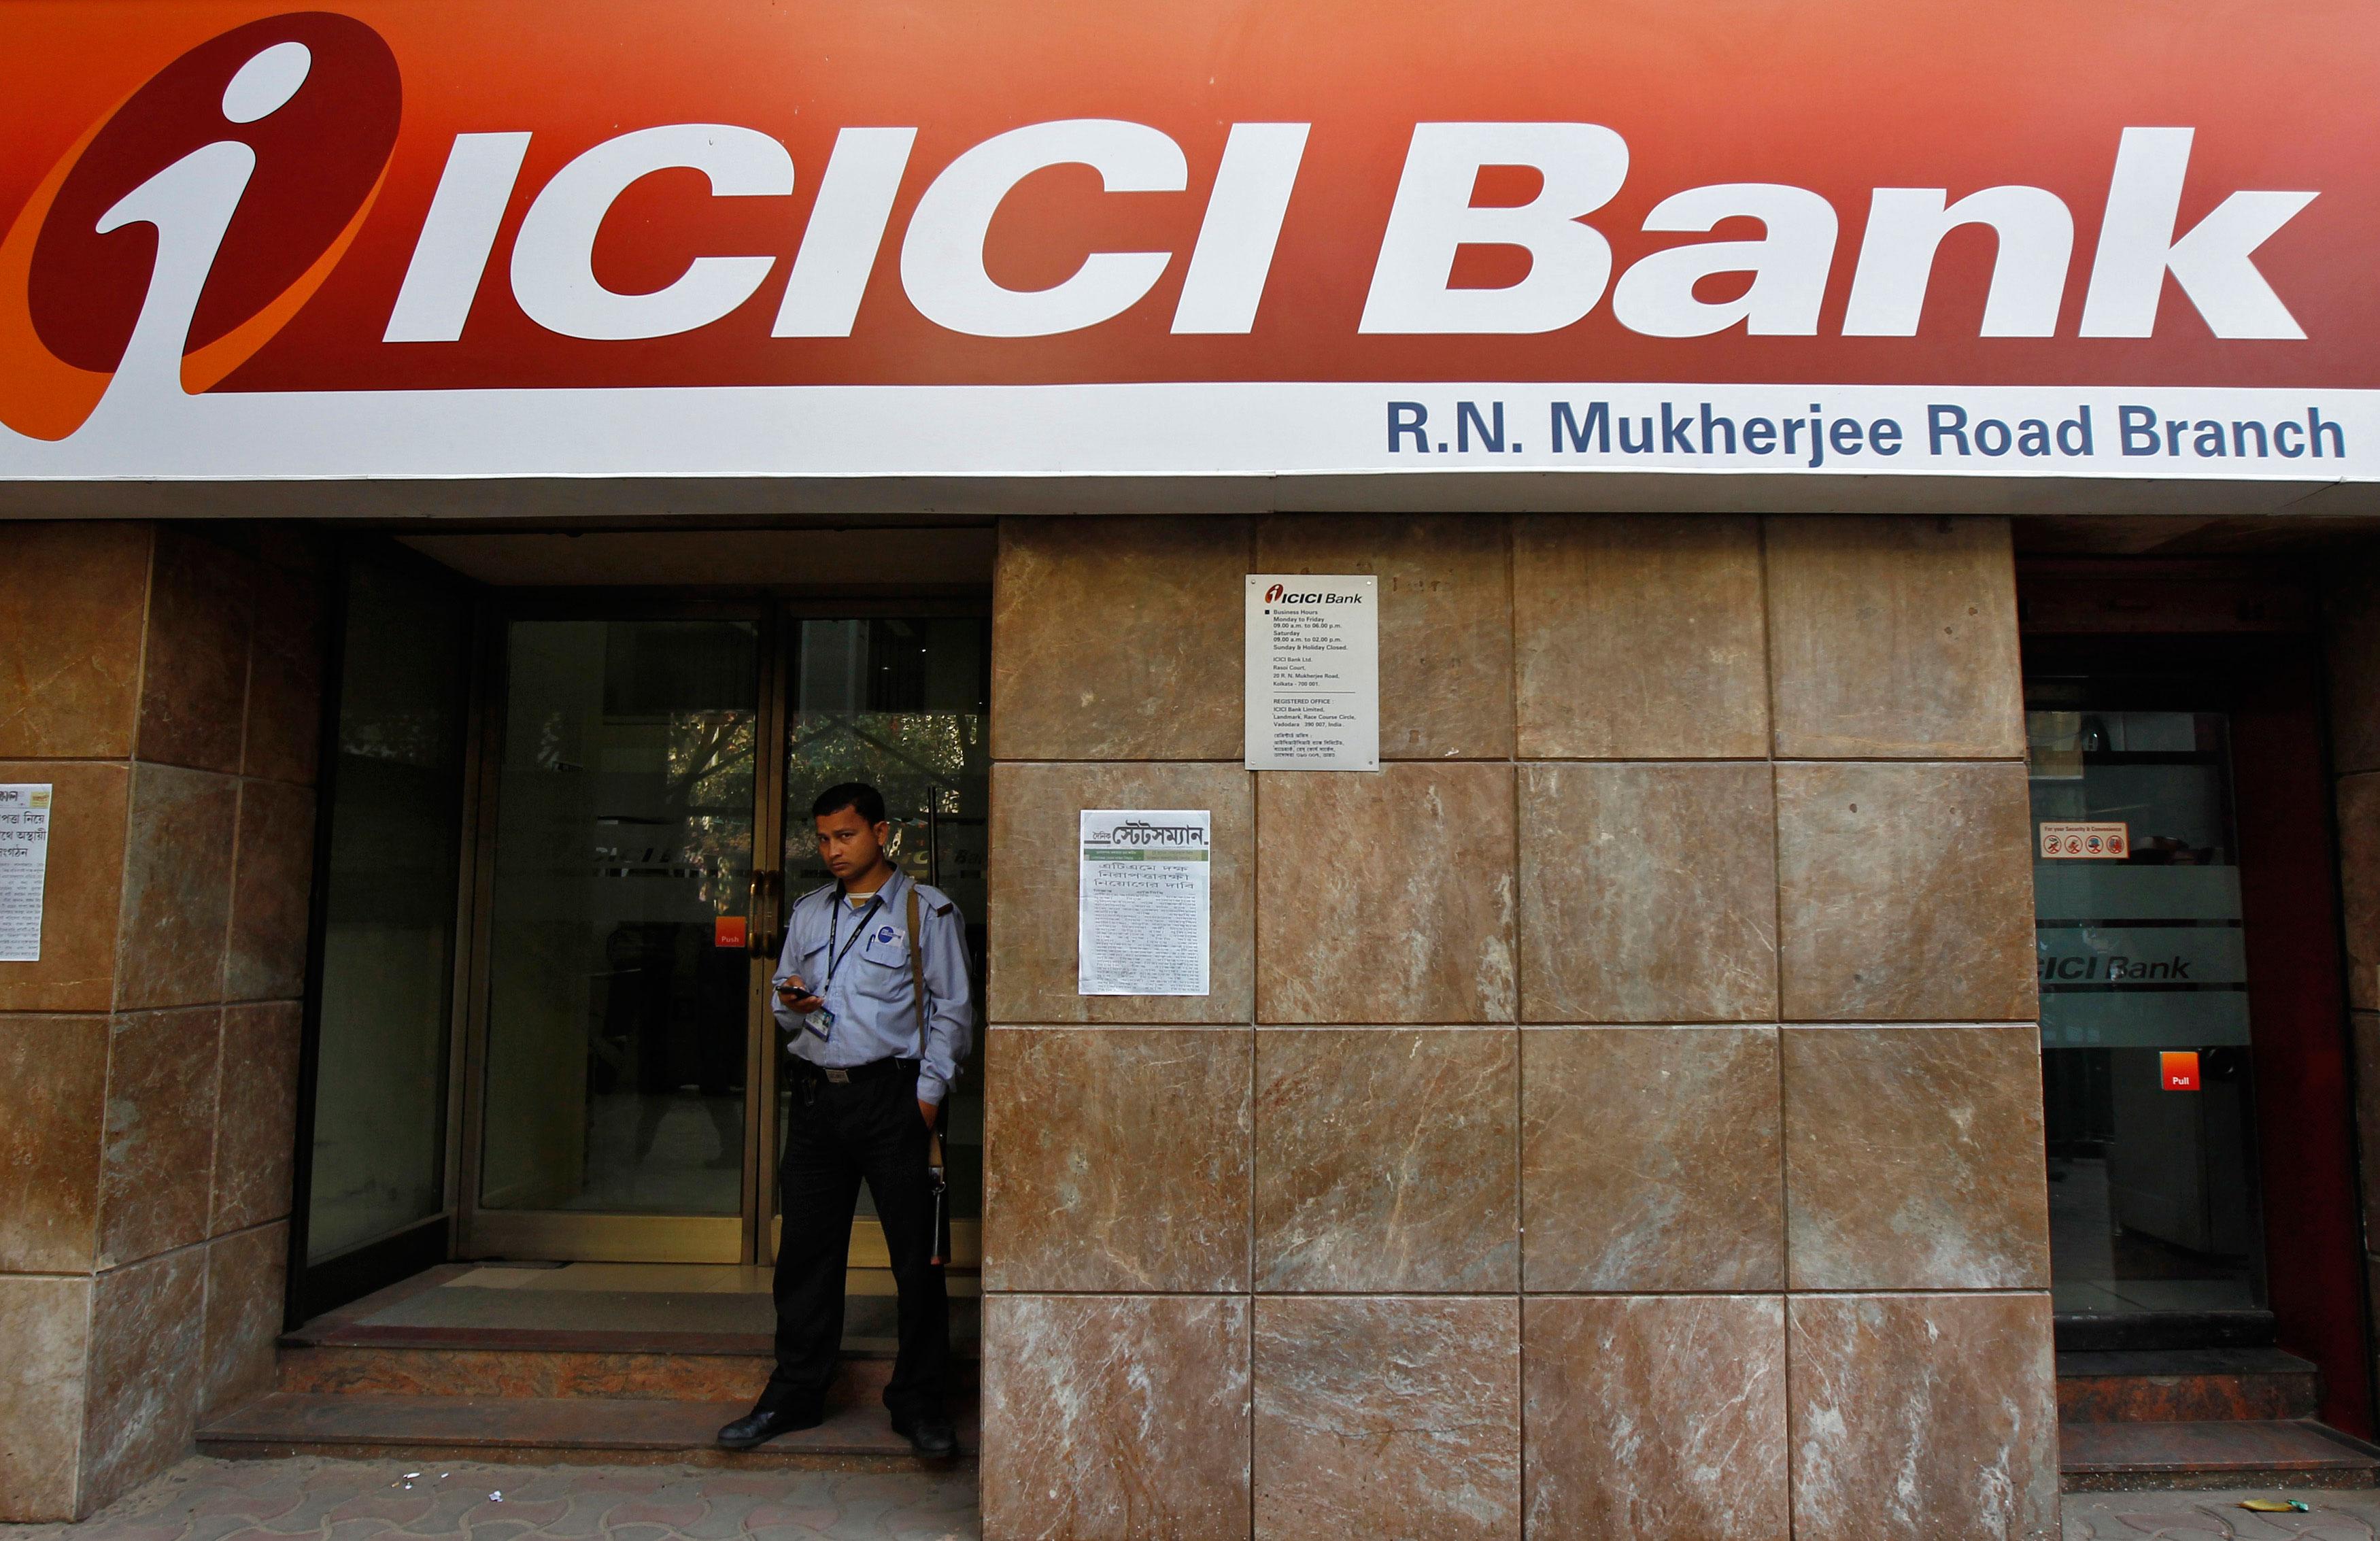 ICICI Bank may sell housing finance arm